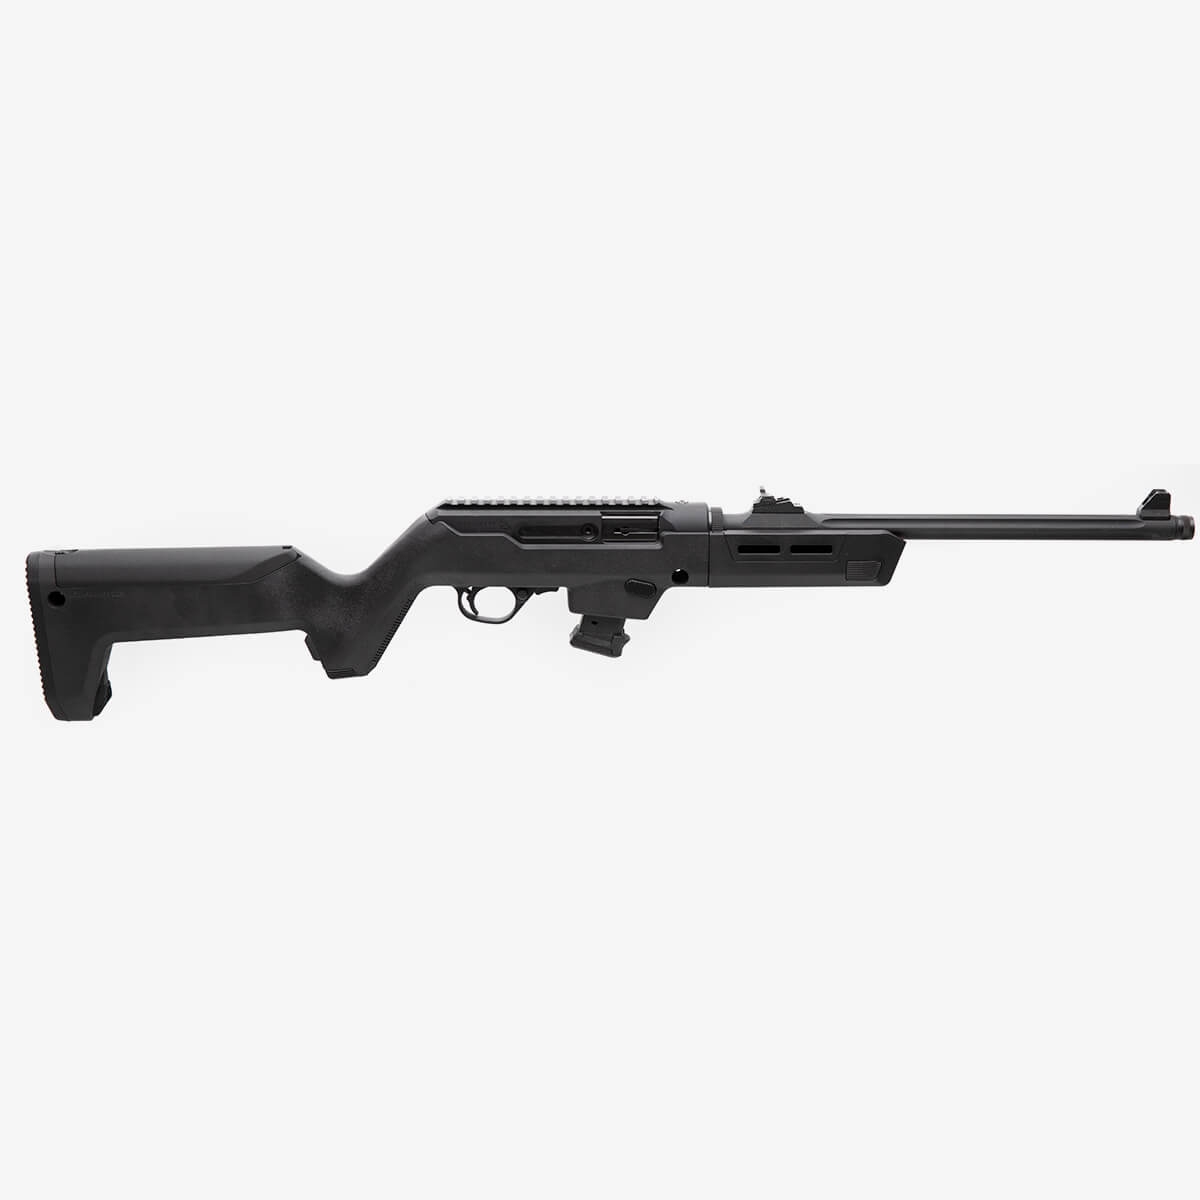 PC Backpacker Stock – Ruger® PC Carbine® Black